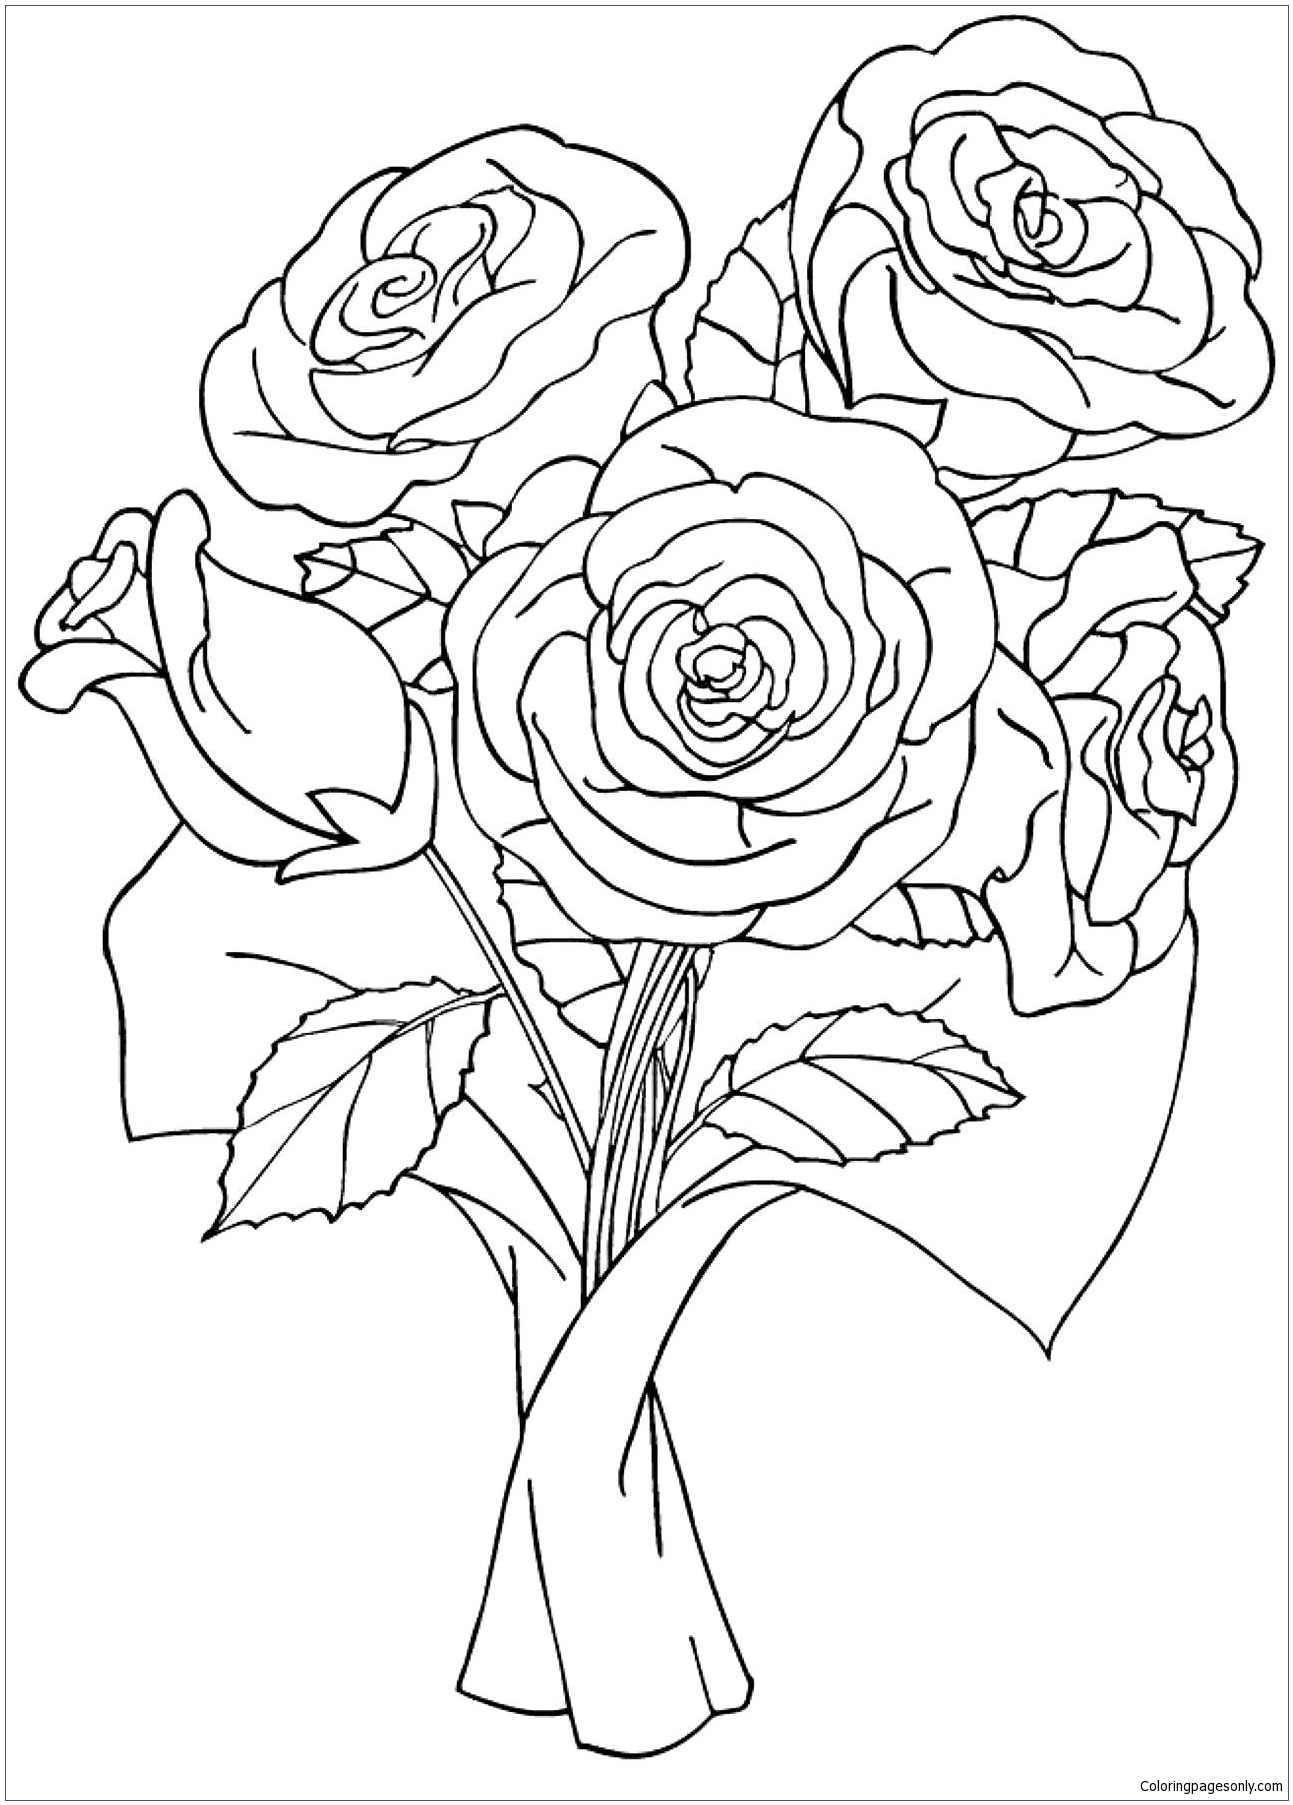 Roses Flower Coloring Page - Free Coloring Pages Online